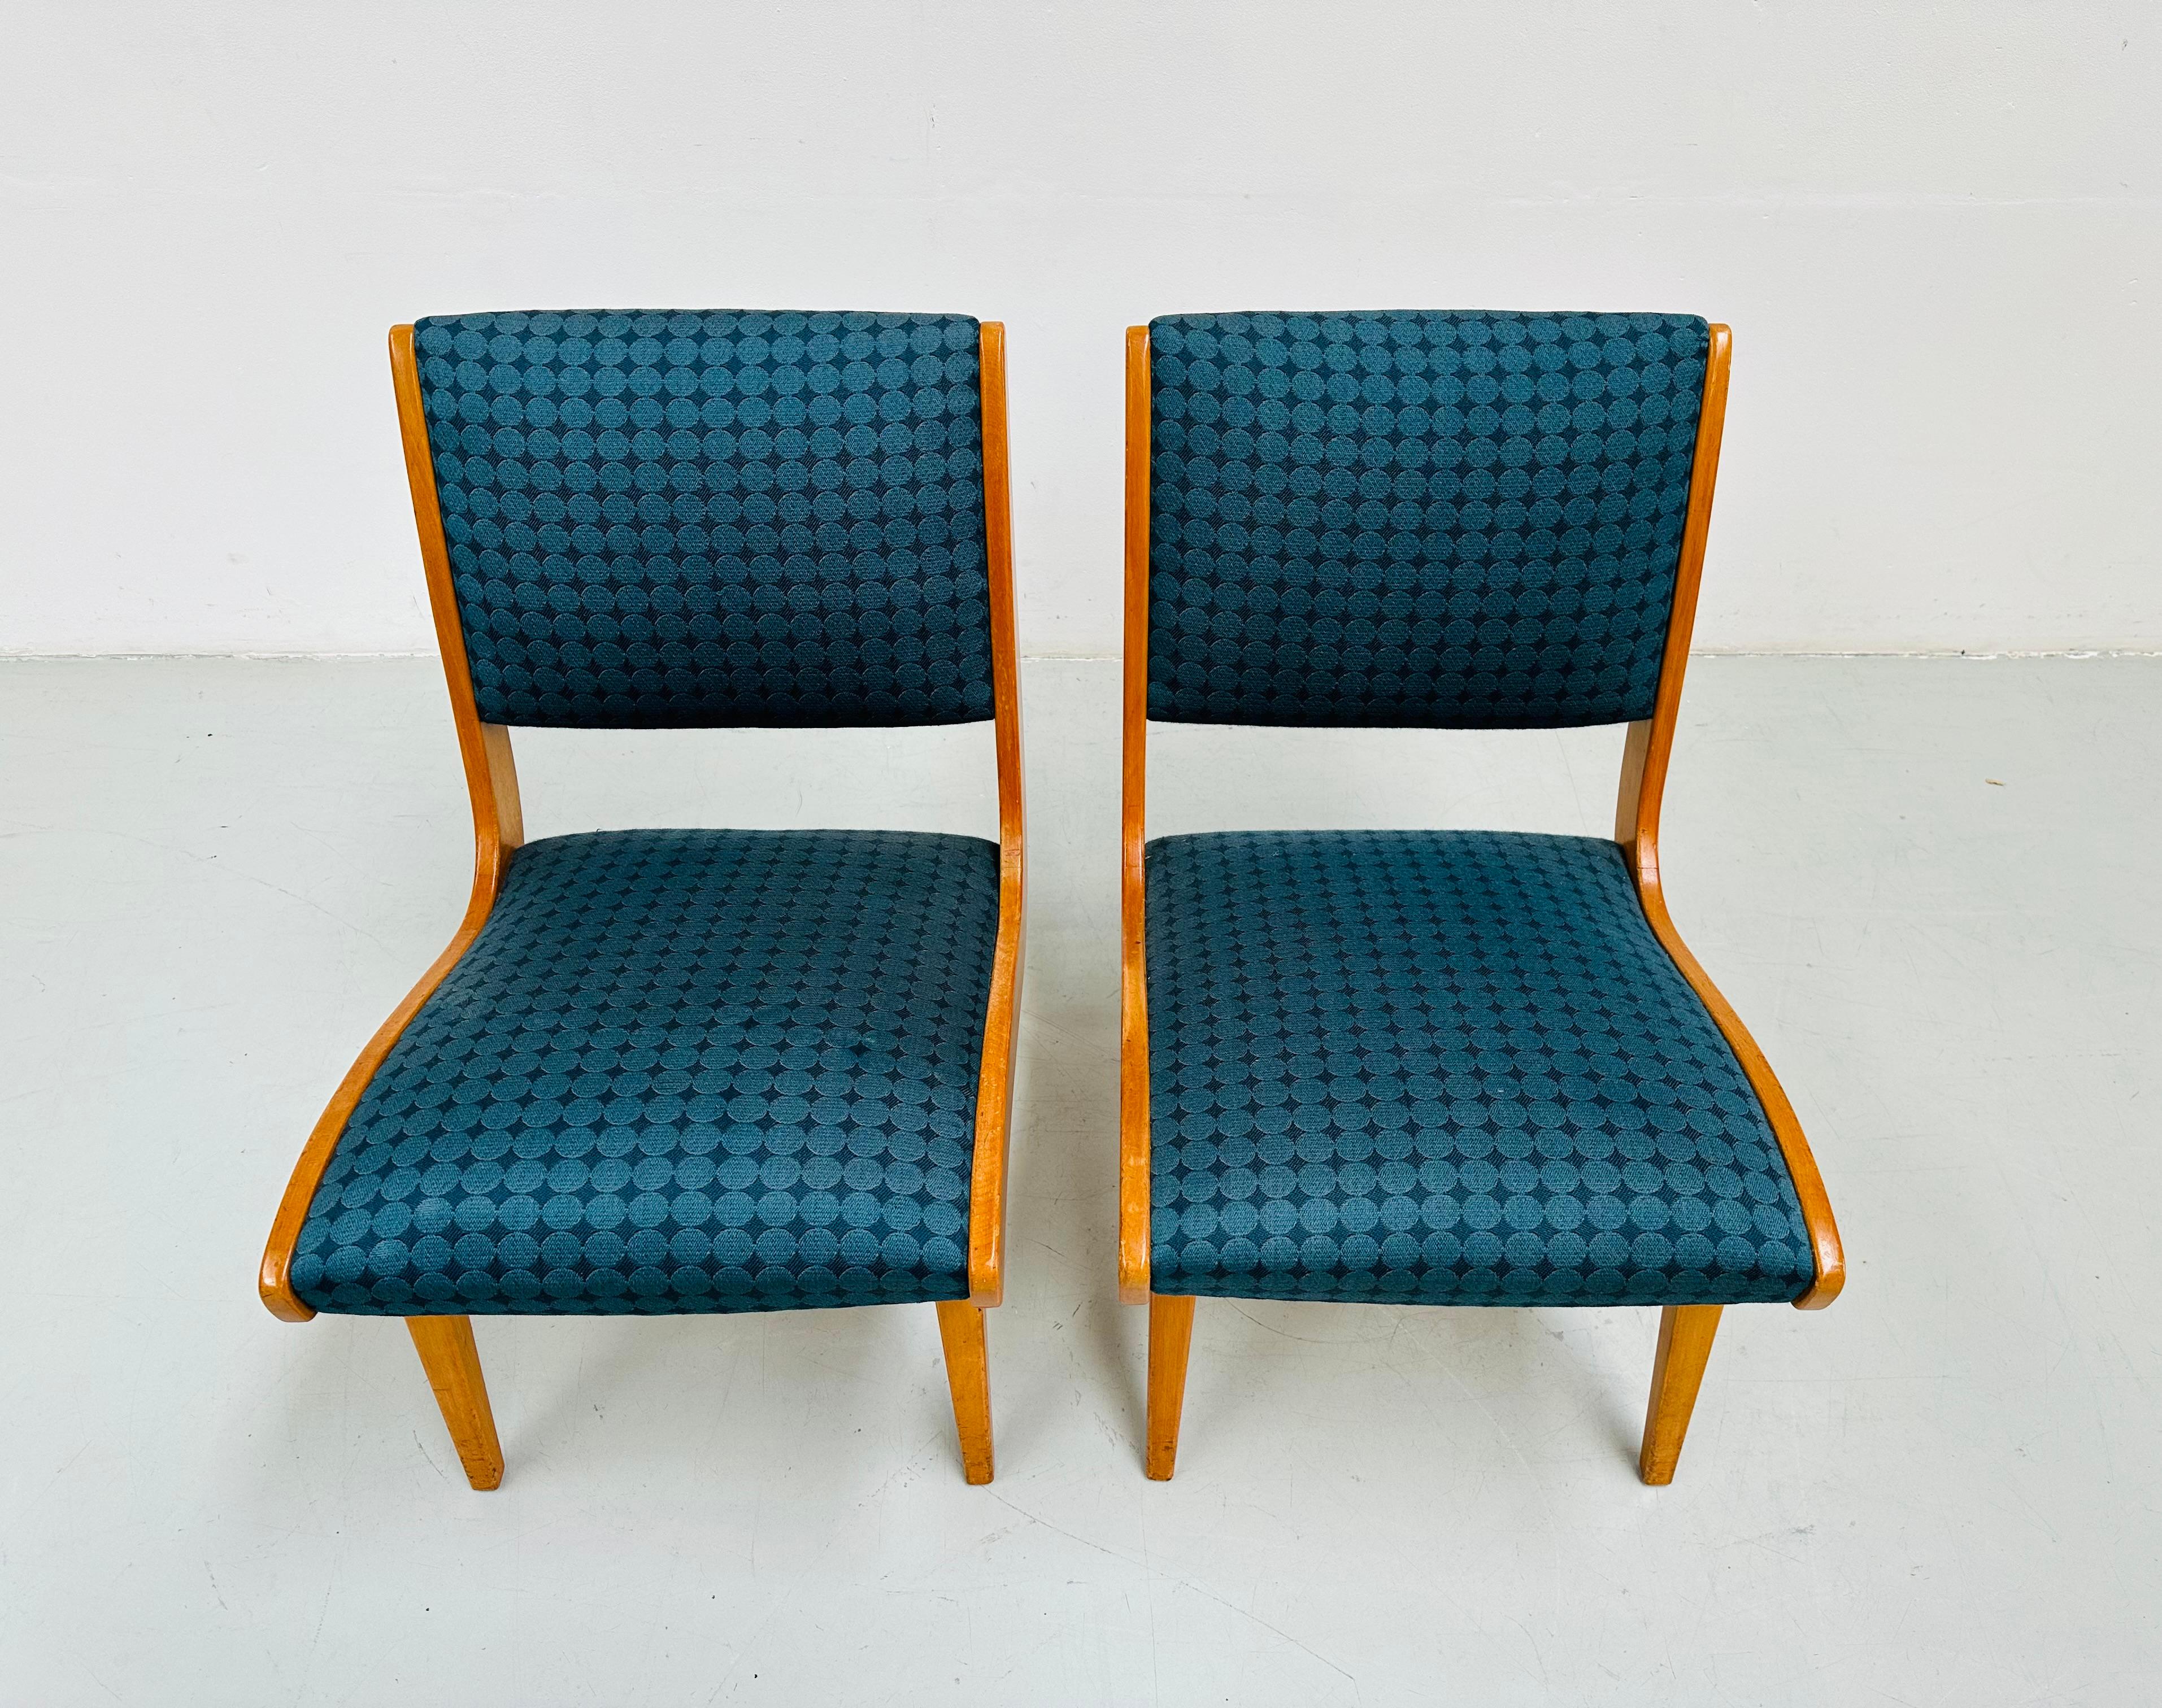 1950s Rare Set Vostra Chairs Numbered & Original Fabric by Jens Risom for Knoll. en vente 7